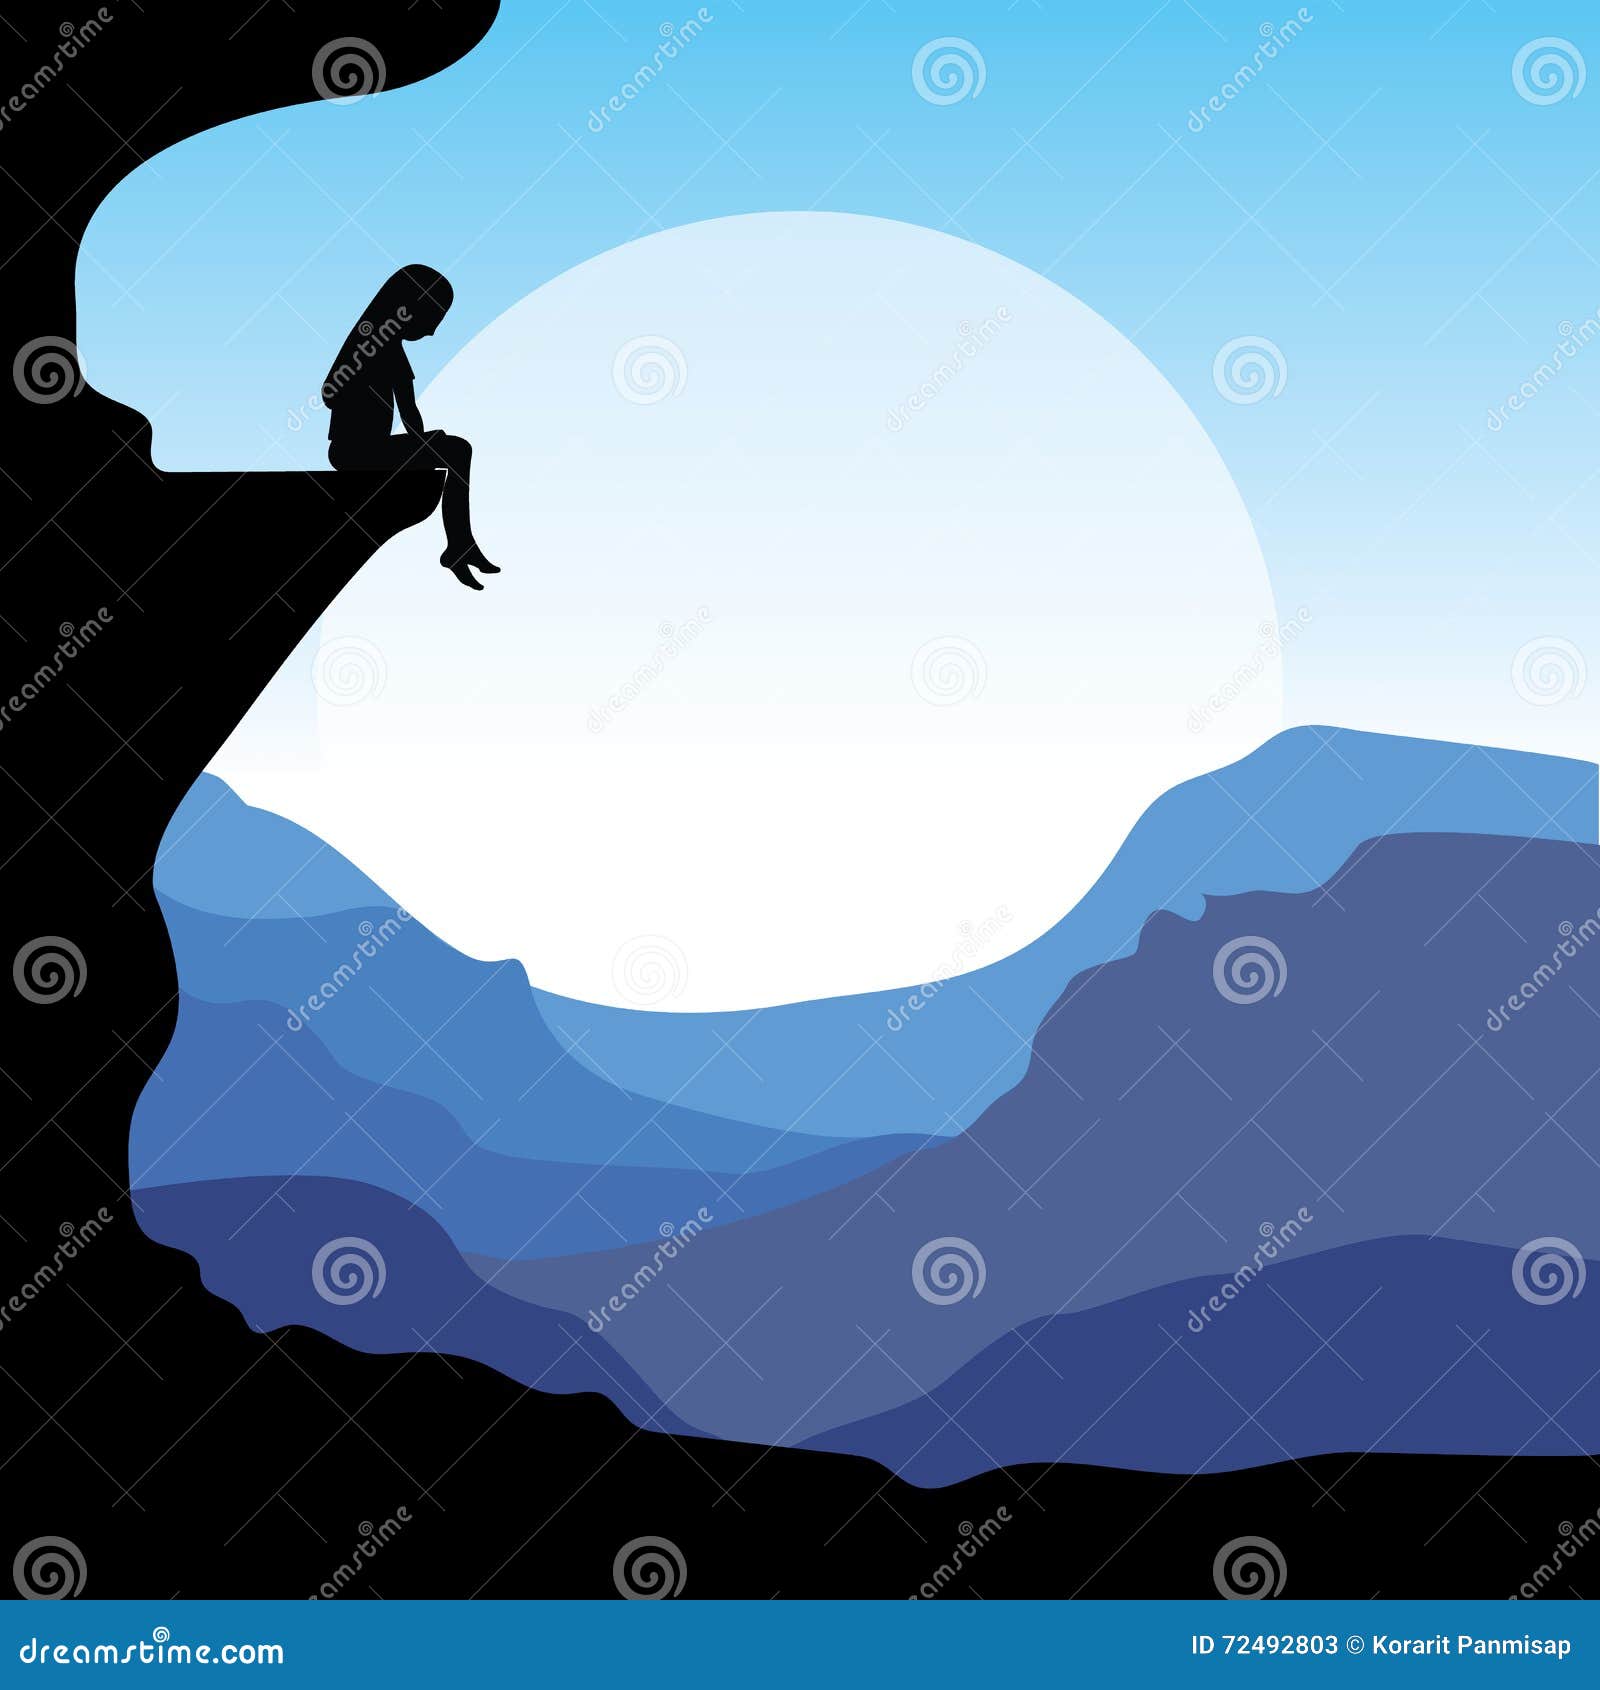 Sitting on a Cliff, Vector Illustrations Stock Vector - Illustration of